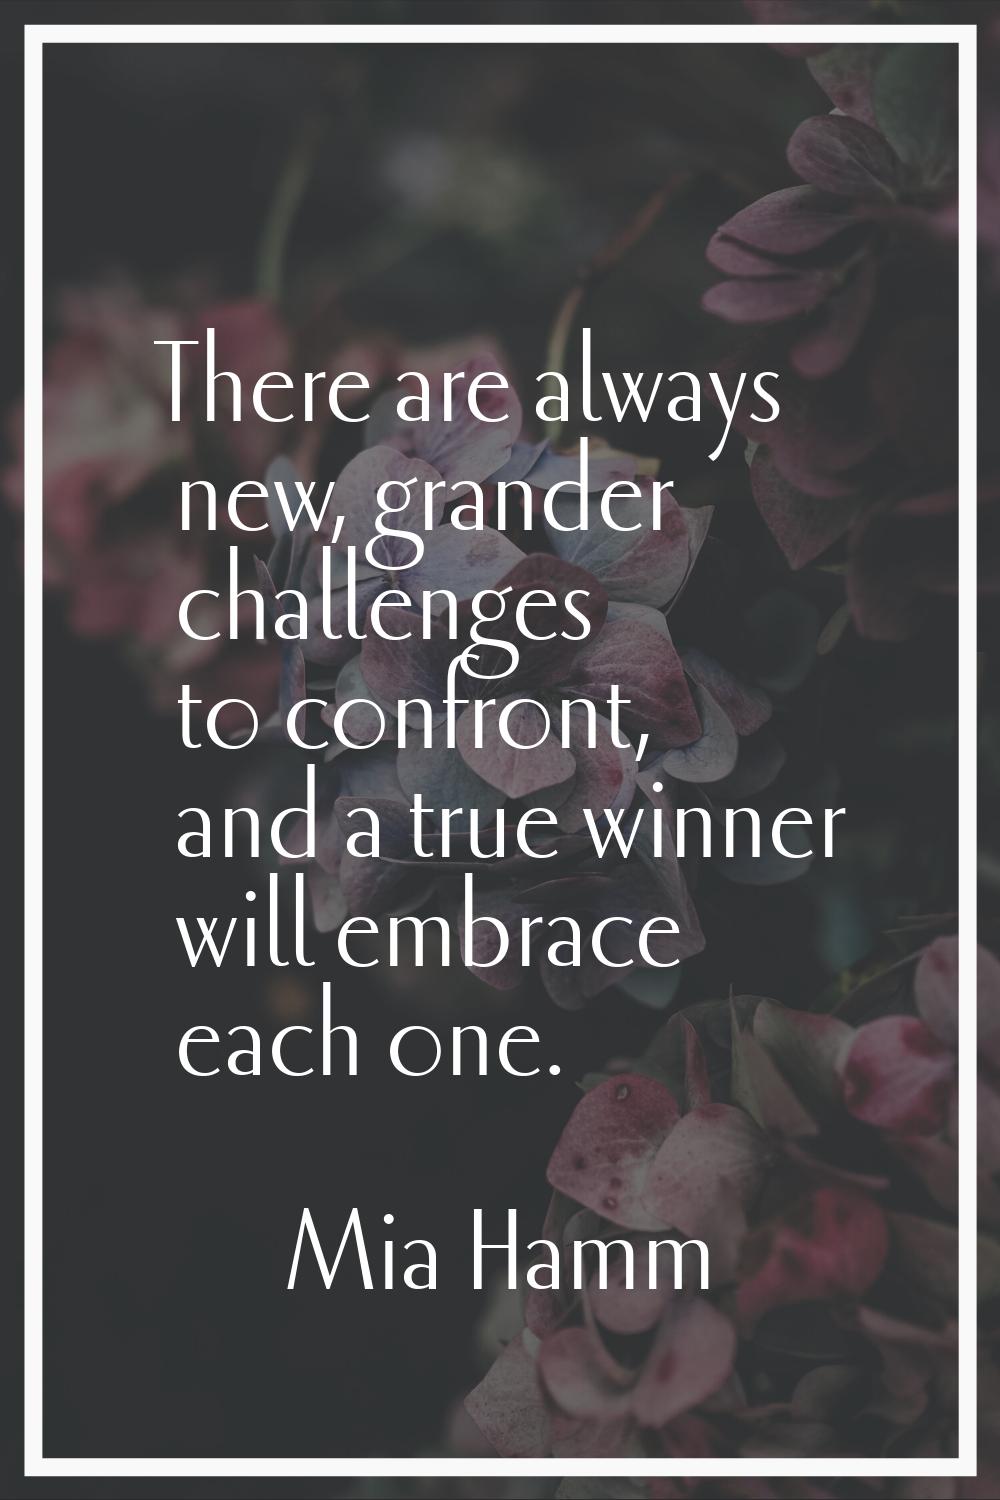 There are always new, grander challenges to confront, and a true winner will embrace each one.